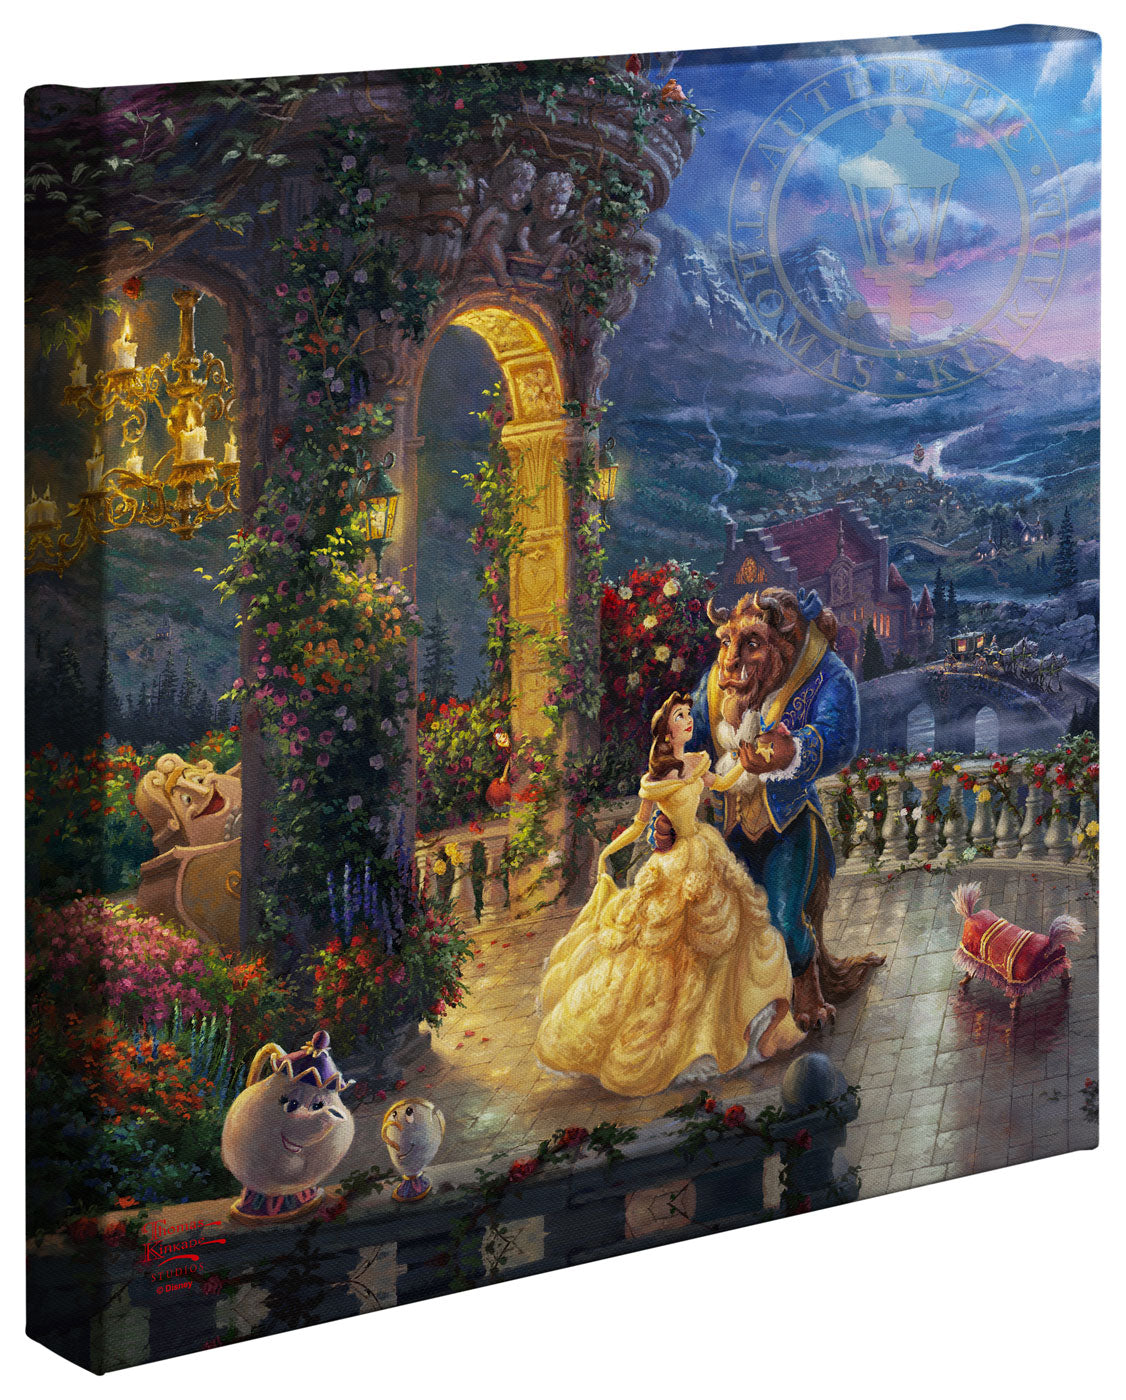  Beauty and the Beast Dancing in the Moonlight – 14″ x 14″ Gallery Wrapped Canvas